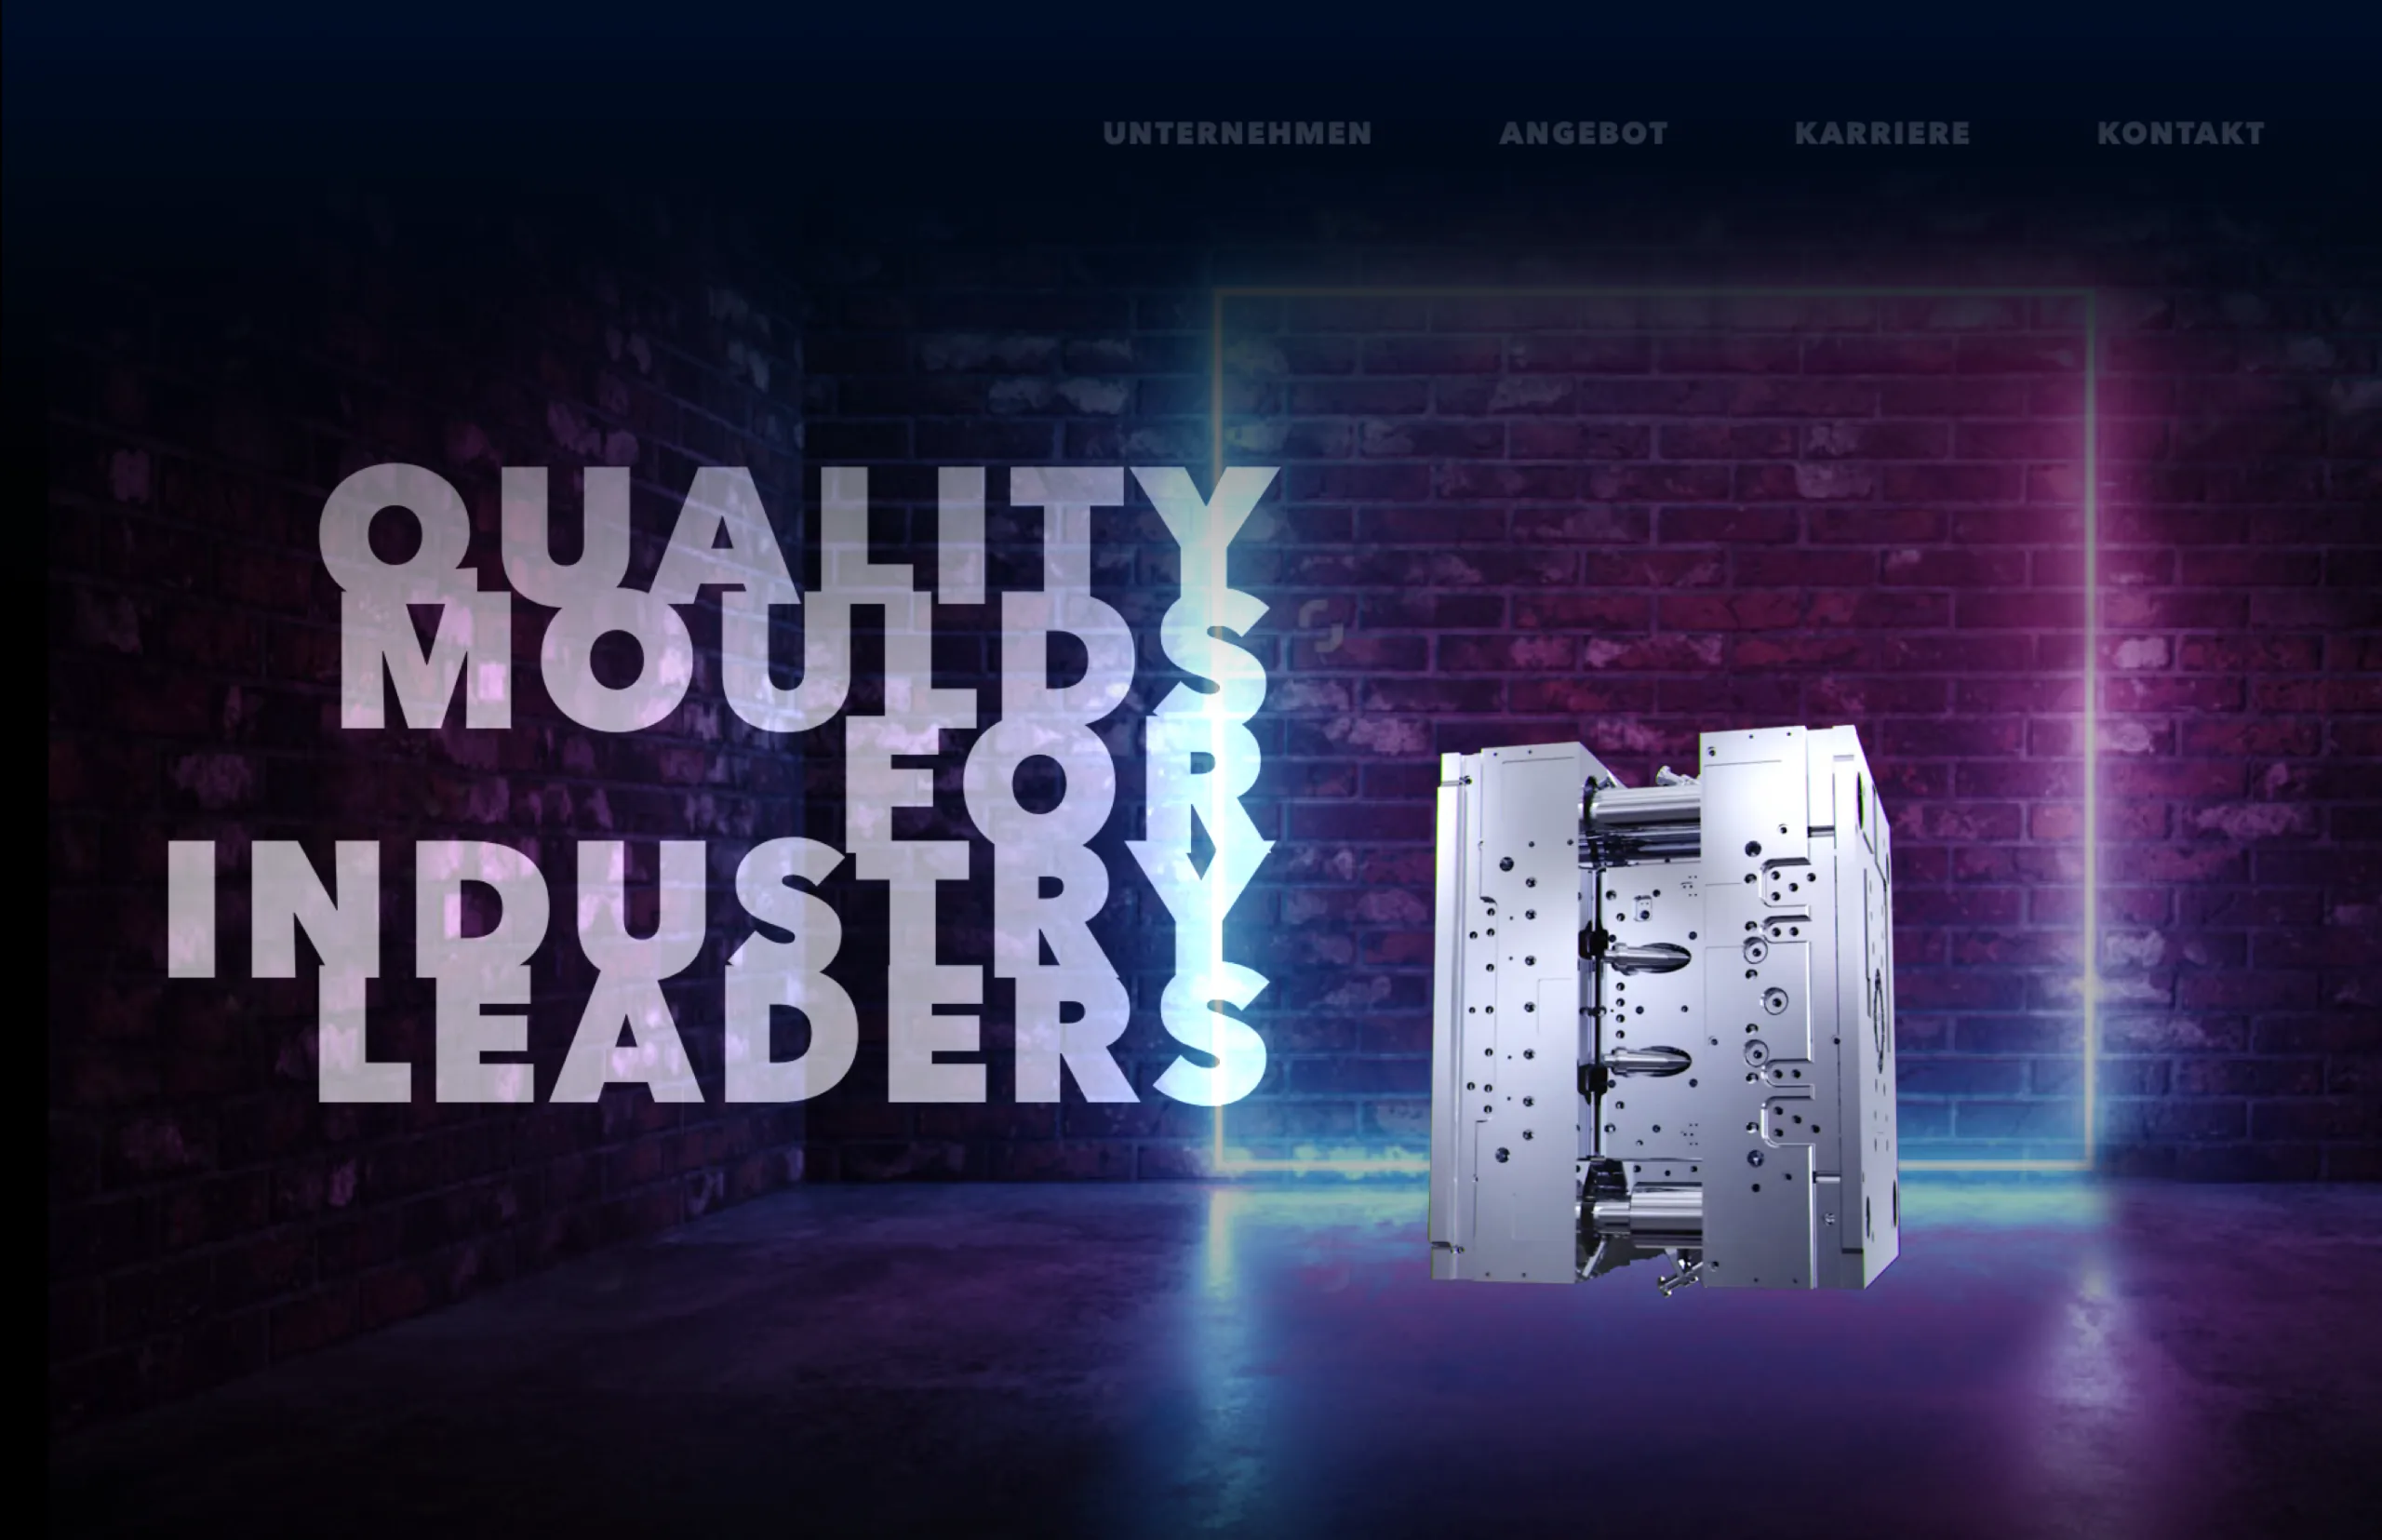 Quality moulds for industry leaders | UX/UI design Vienna